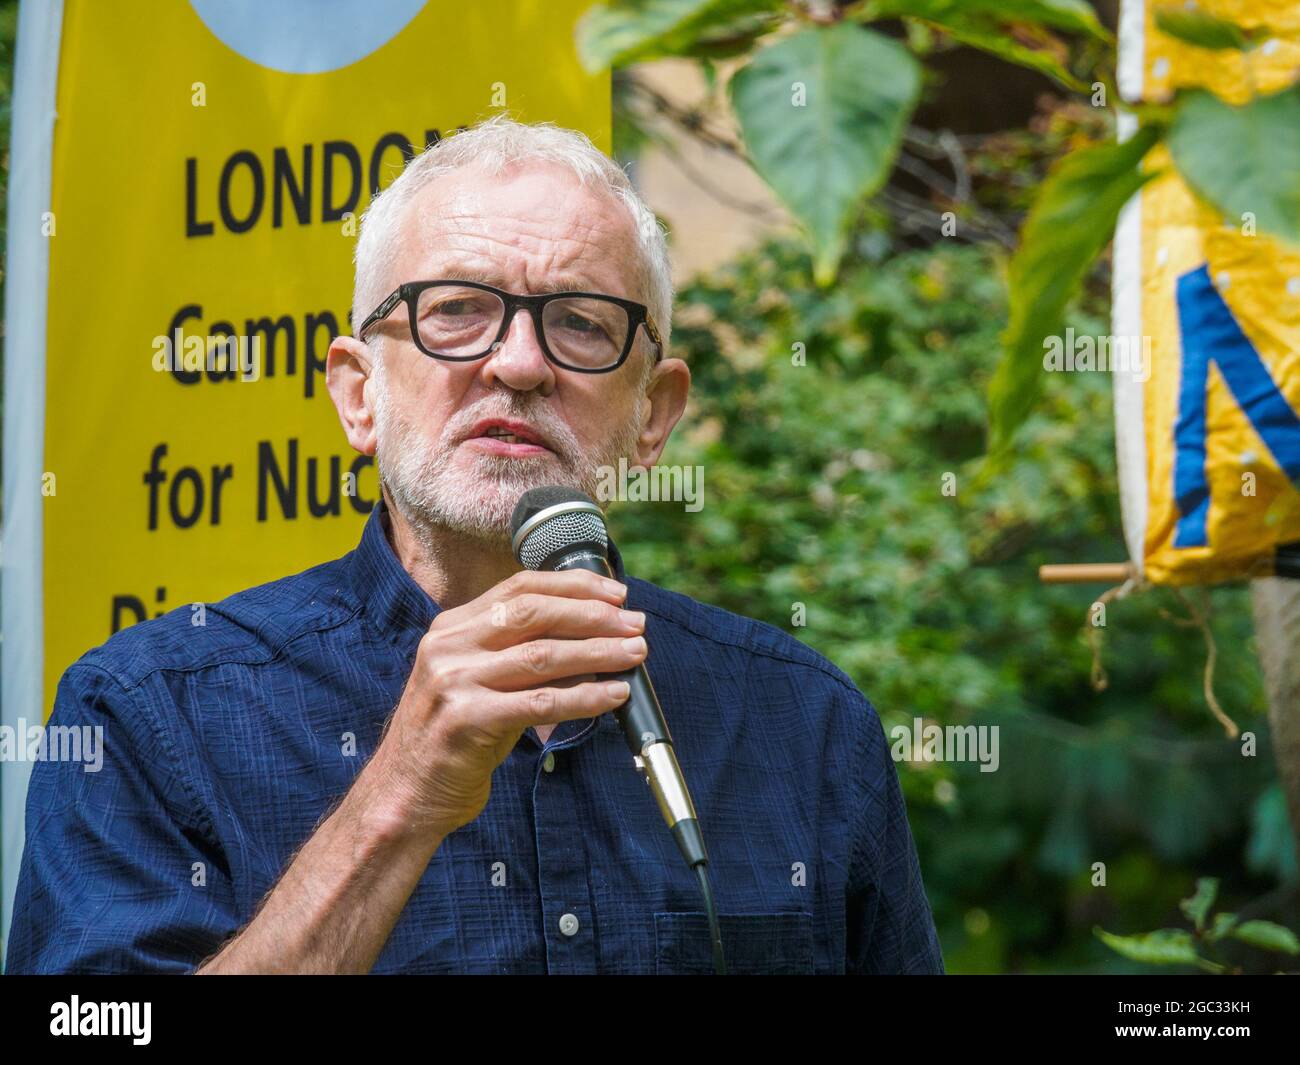 London, UK. 6th August 2021. Islington MP Jeremy Corbyn speaks. 76 years after atomic bombs were dropped on Hiroshima and Nagaski, London CND met at the Hiroshima Cherry tree in Tavistock Square to remember the many killed and survivors who are still suffering the event, and to celebrate the UN treaty prohibiting nuclear weapons which came into force this January. They called on the government to end the UK's nuclear weapon programme. Peter Marshall/Alamy Live News Stock Photo